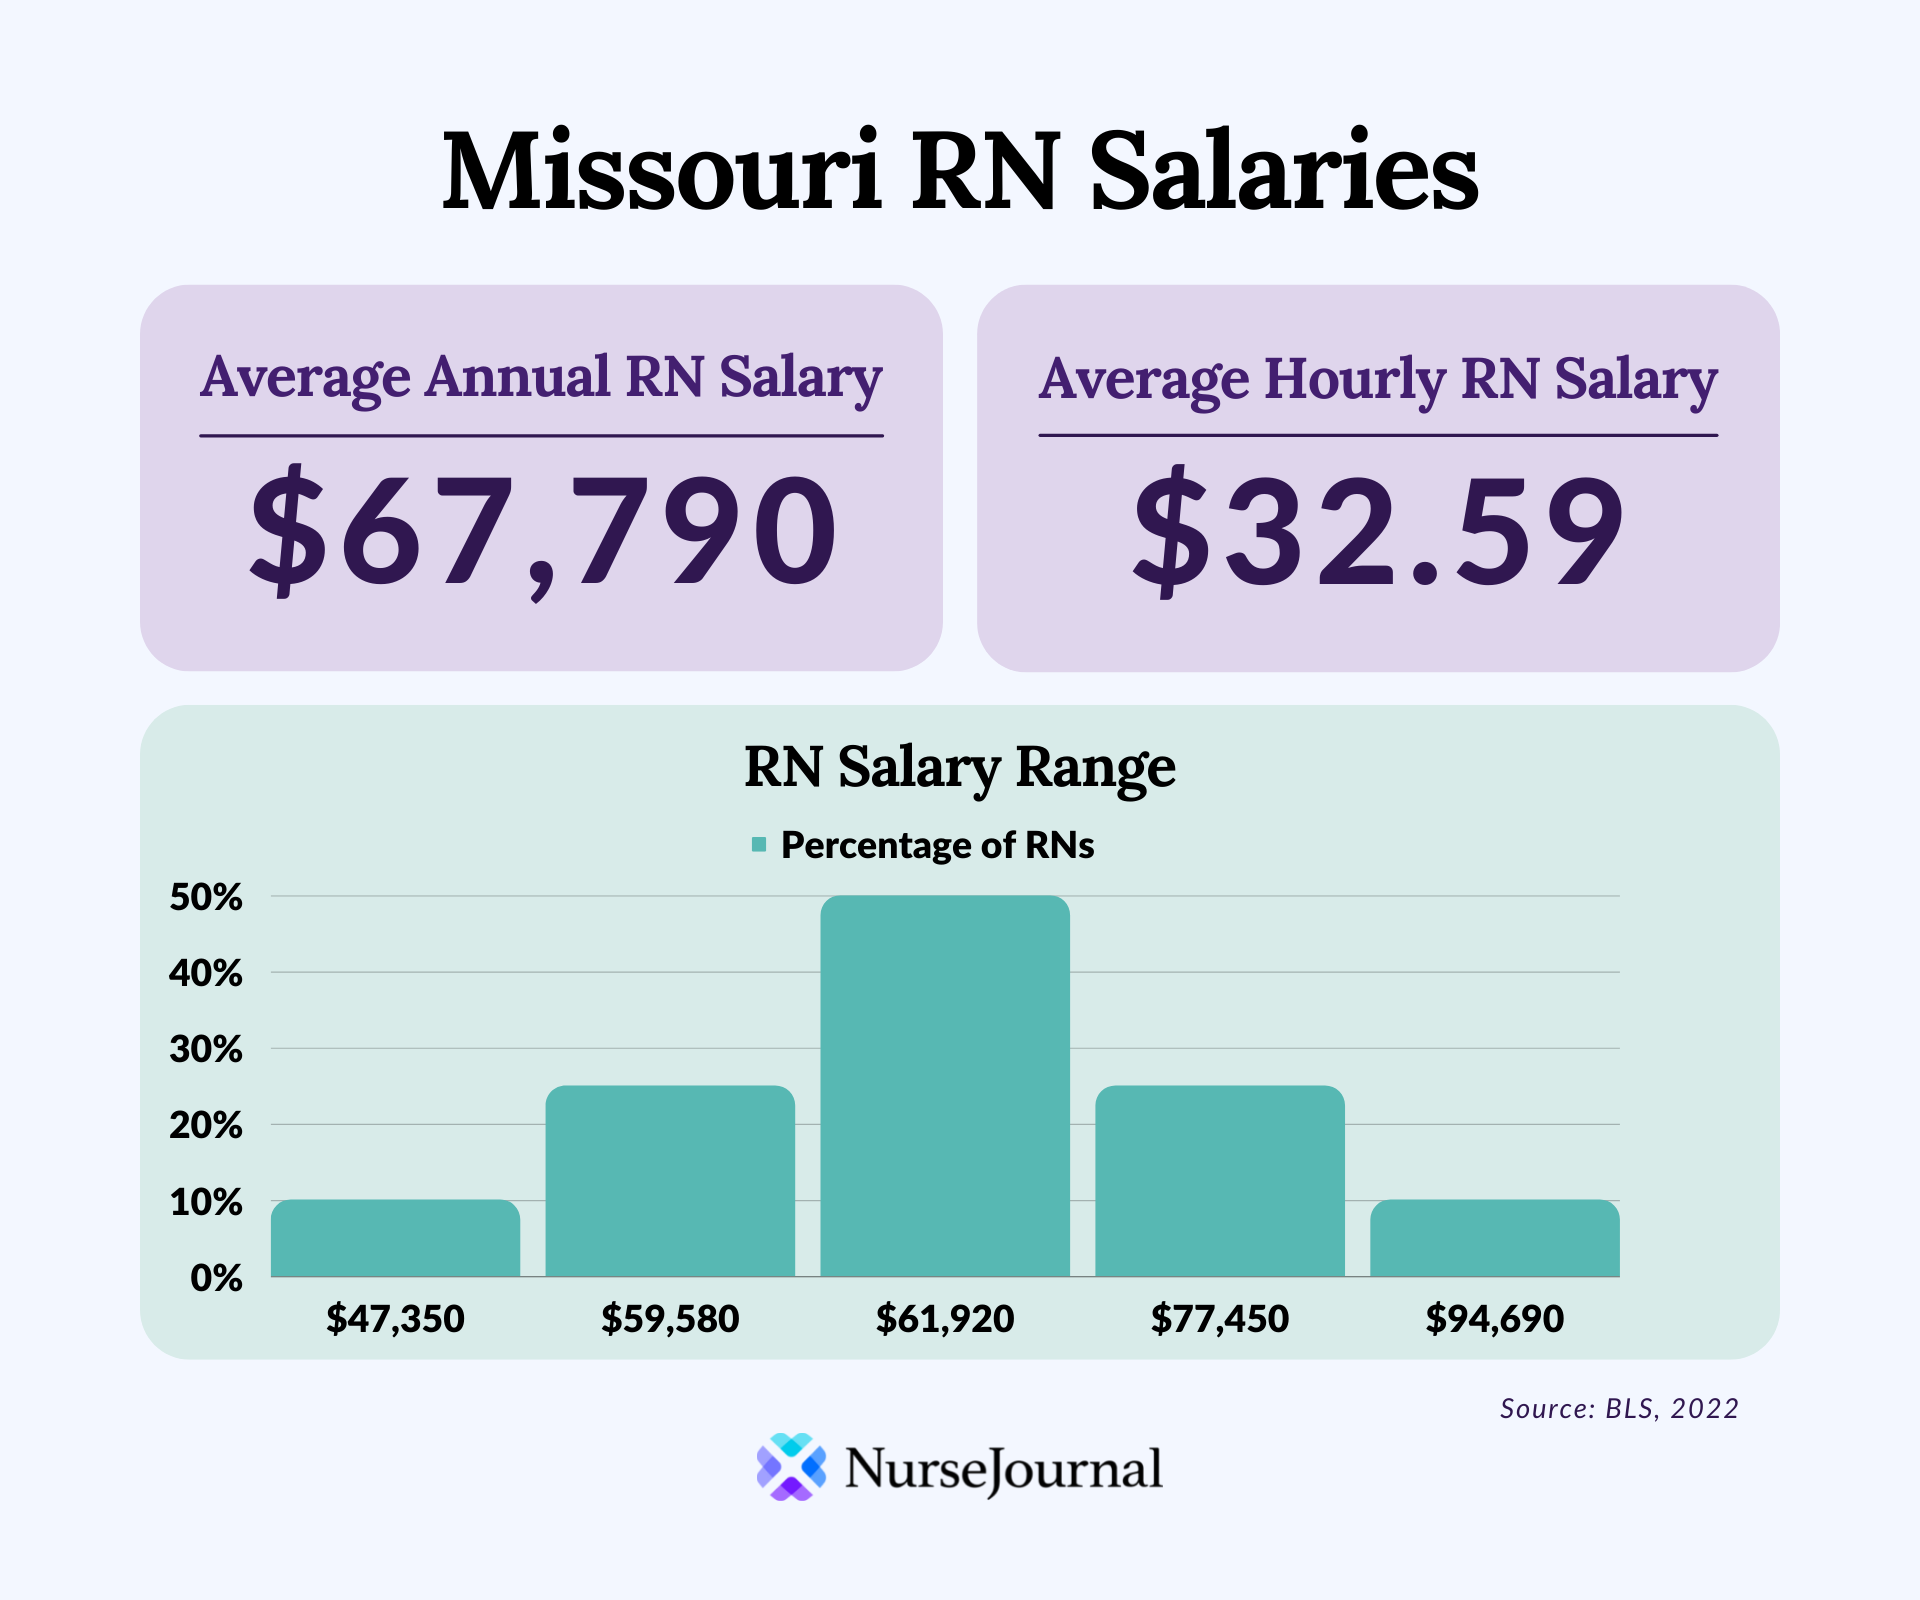 Infographic of registered nursing salary data in Missouri. The average annual RN salary is $67,790. The average hourly RN salary is $32.59. Average RN salaries range from $4,7350 among the bottom 10th percentile of earners to $94,690 among the top 90th percentile of earners.